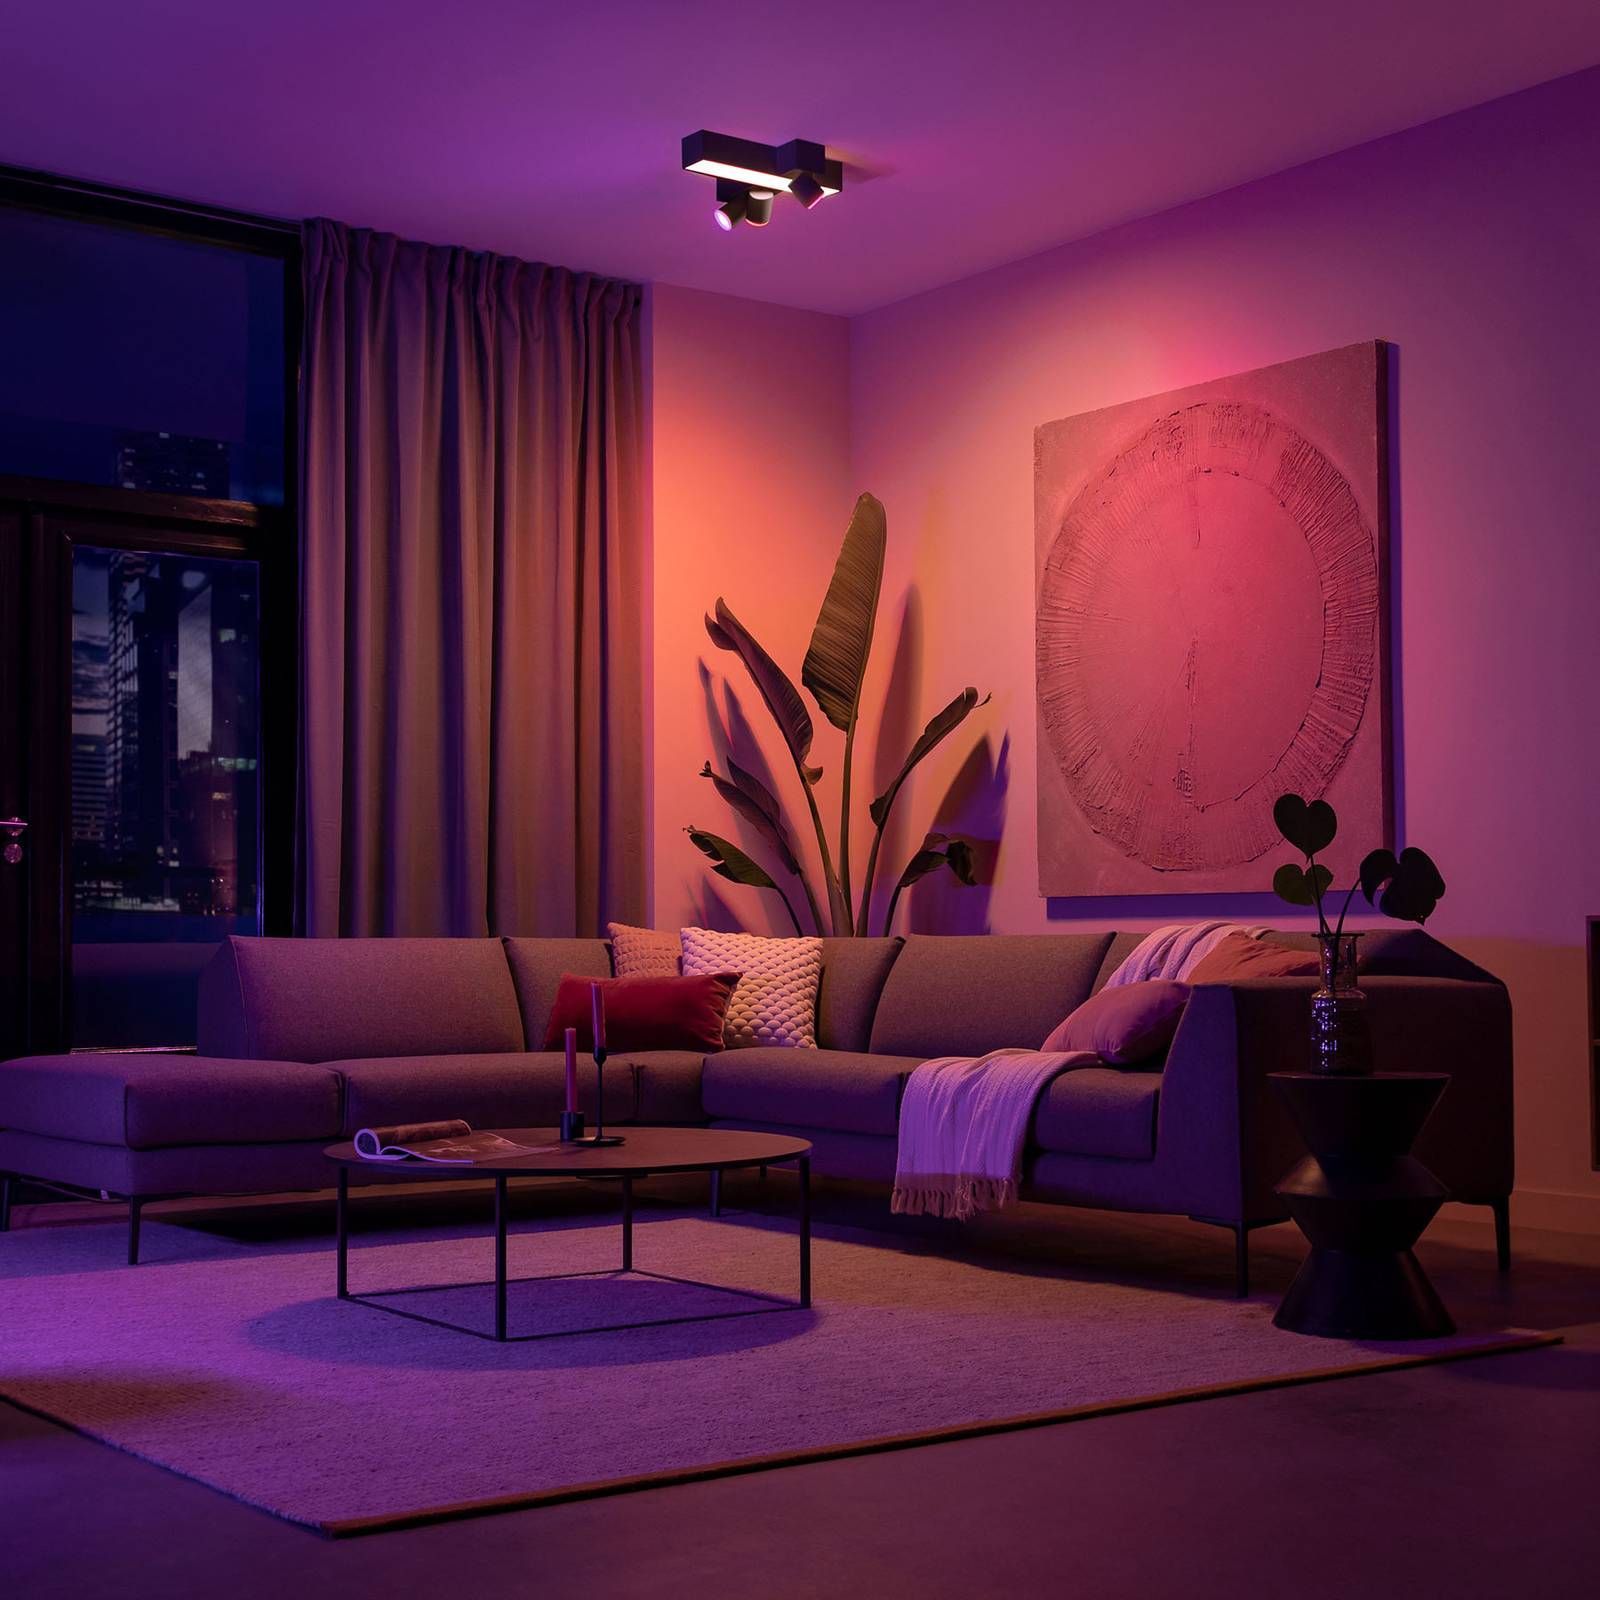 Mood lighting emits colorful light, creating a relaxing, romantic, and party atmosphere in the living space